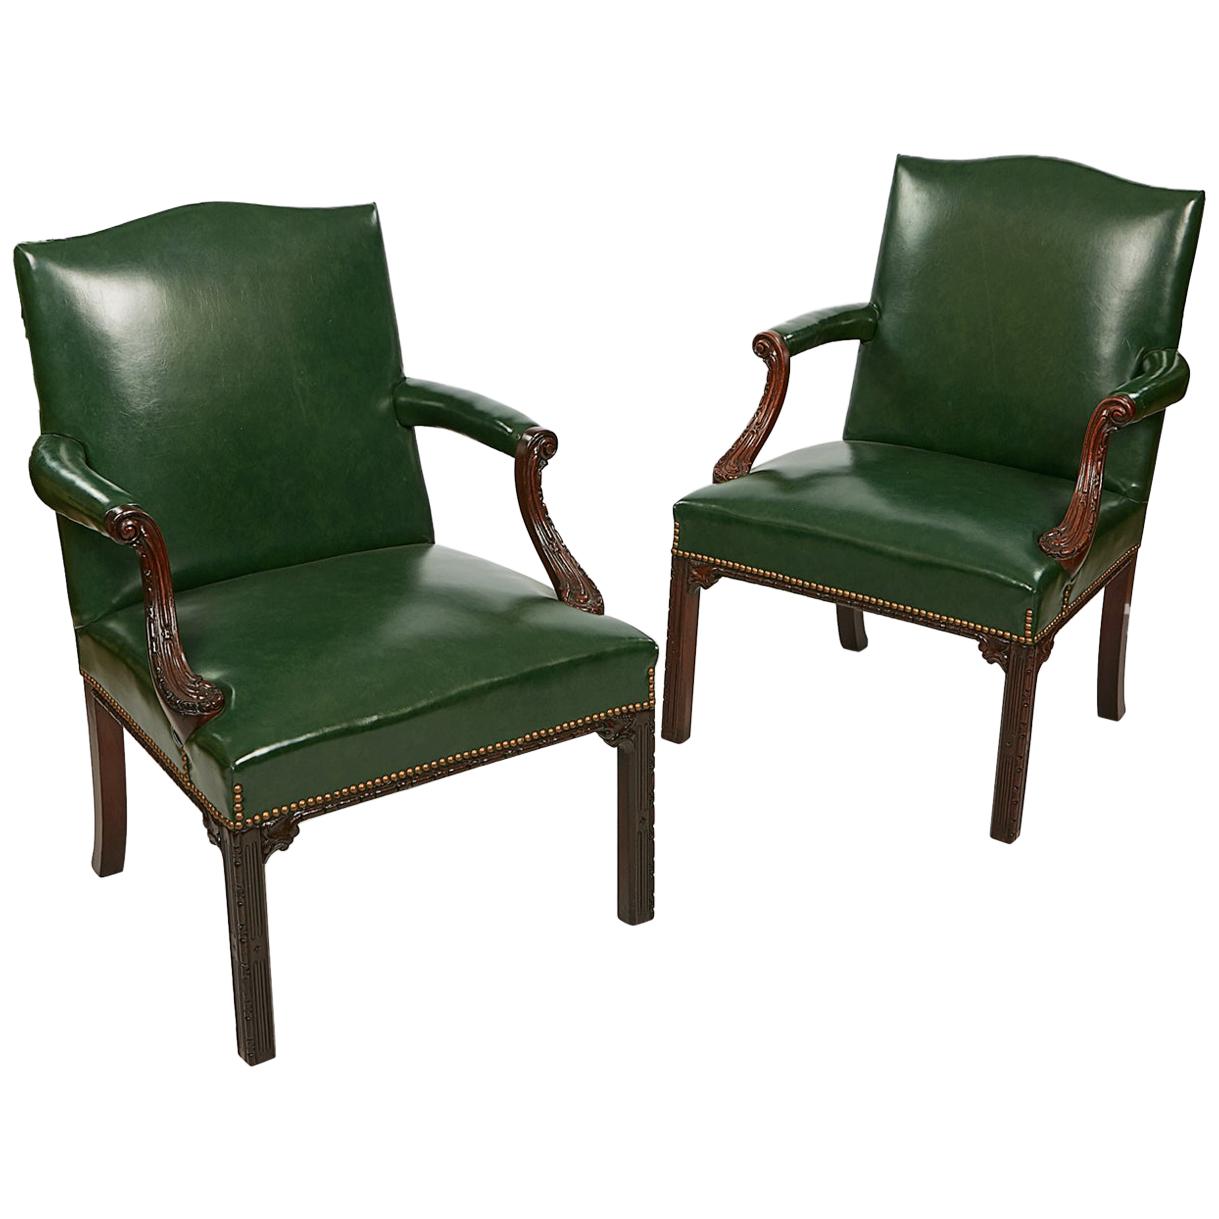 Late 18th Century George III Pair of Gainsborough Armchairs